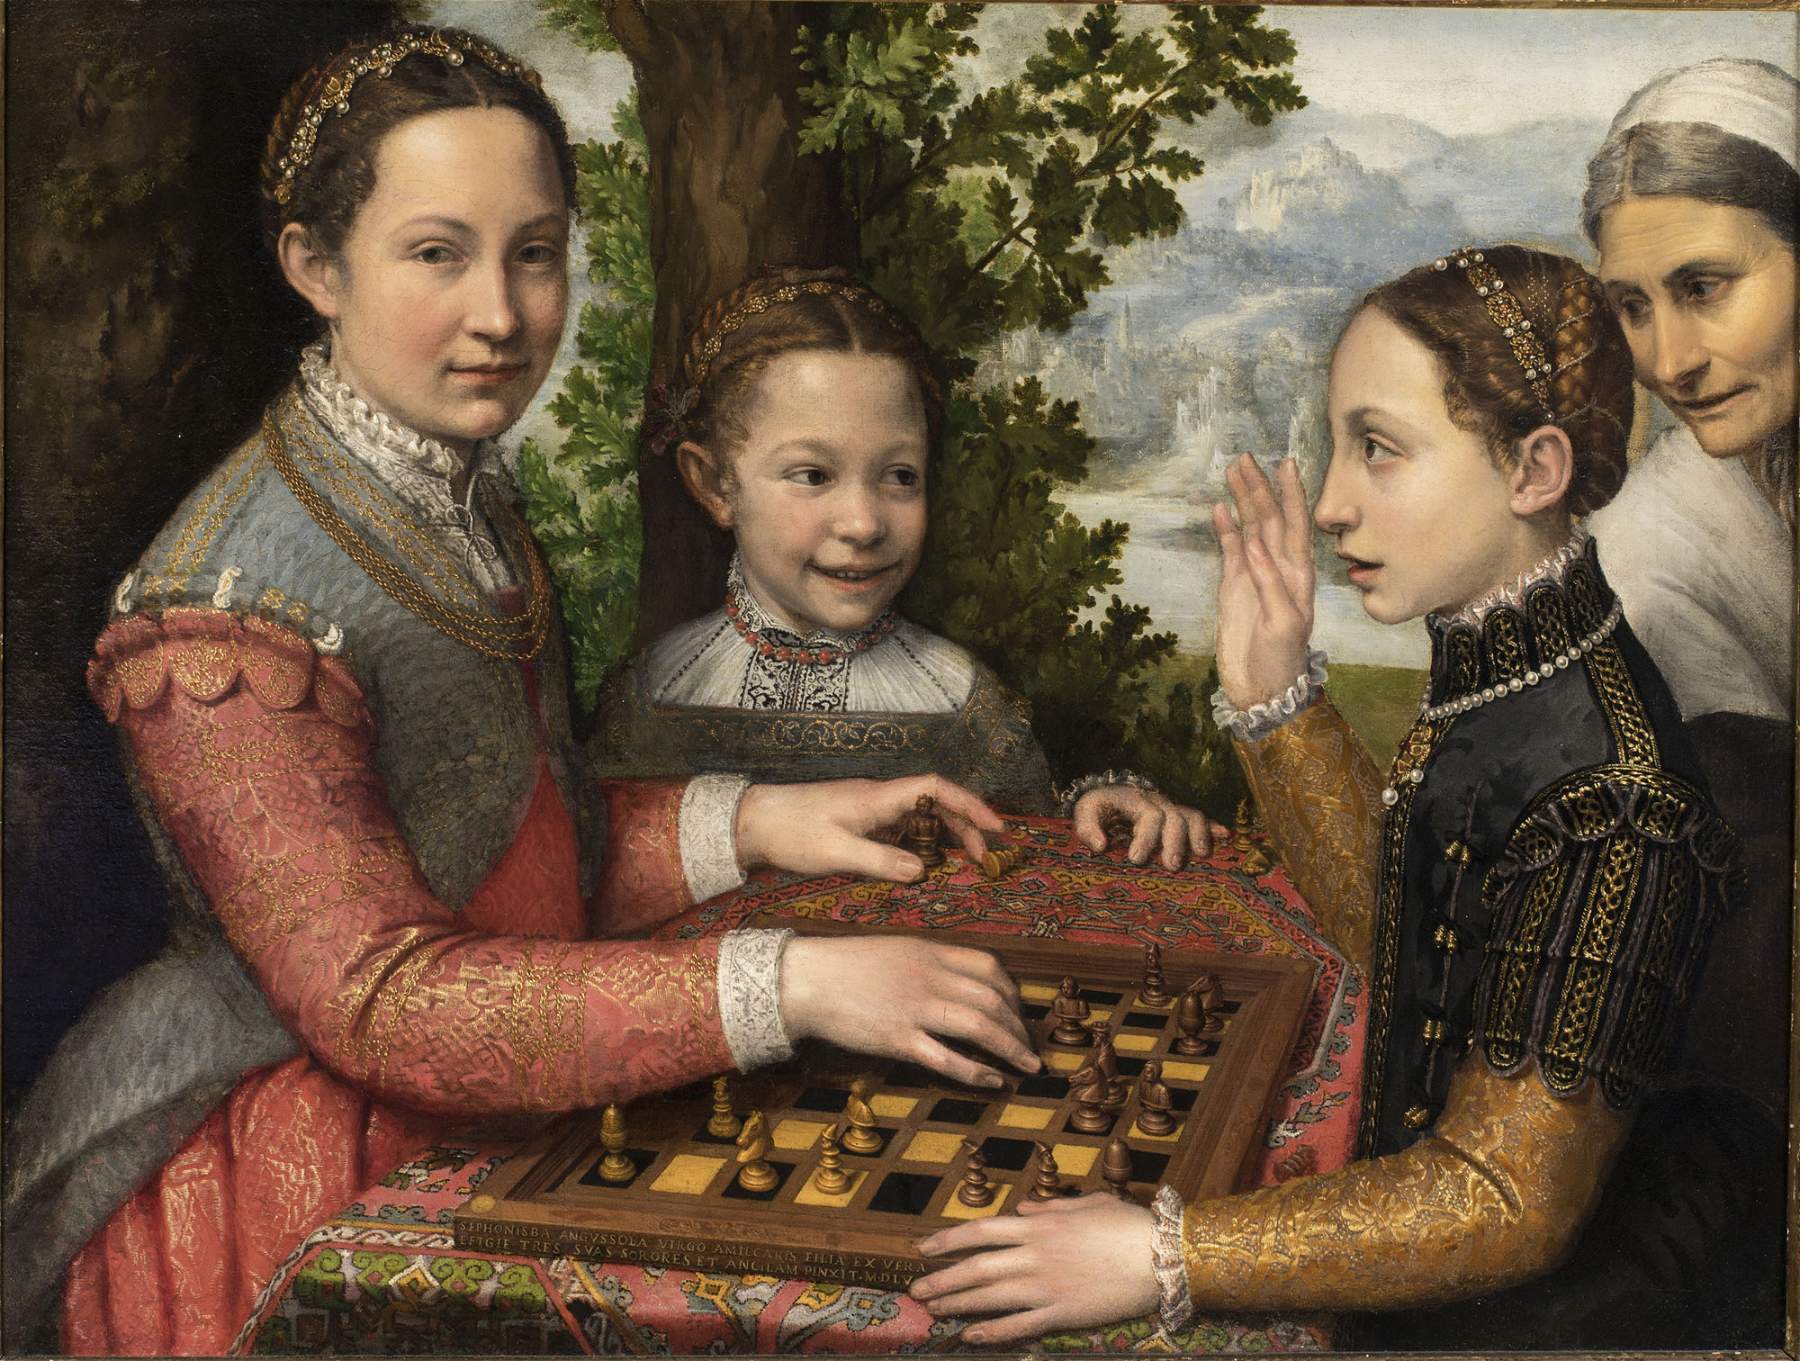 Sofonisba Anguissola, life and works of the great sixteenth-century painter